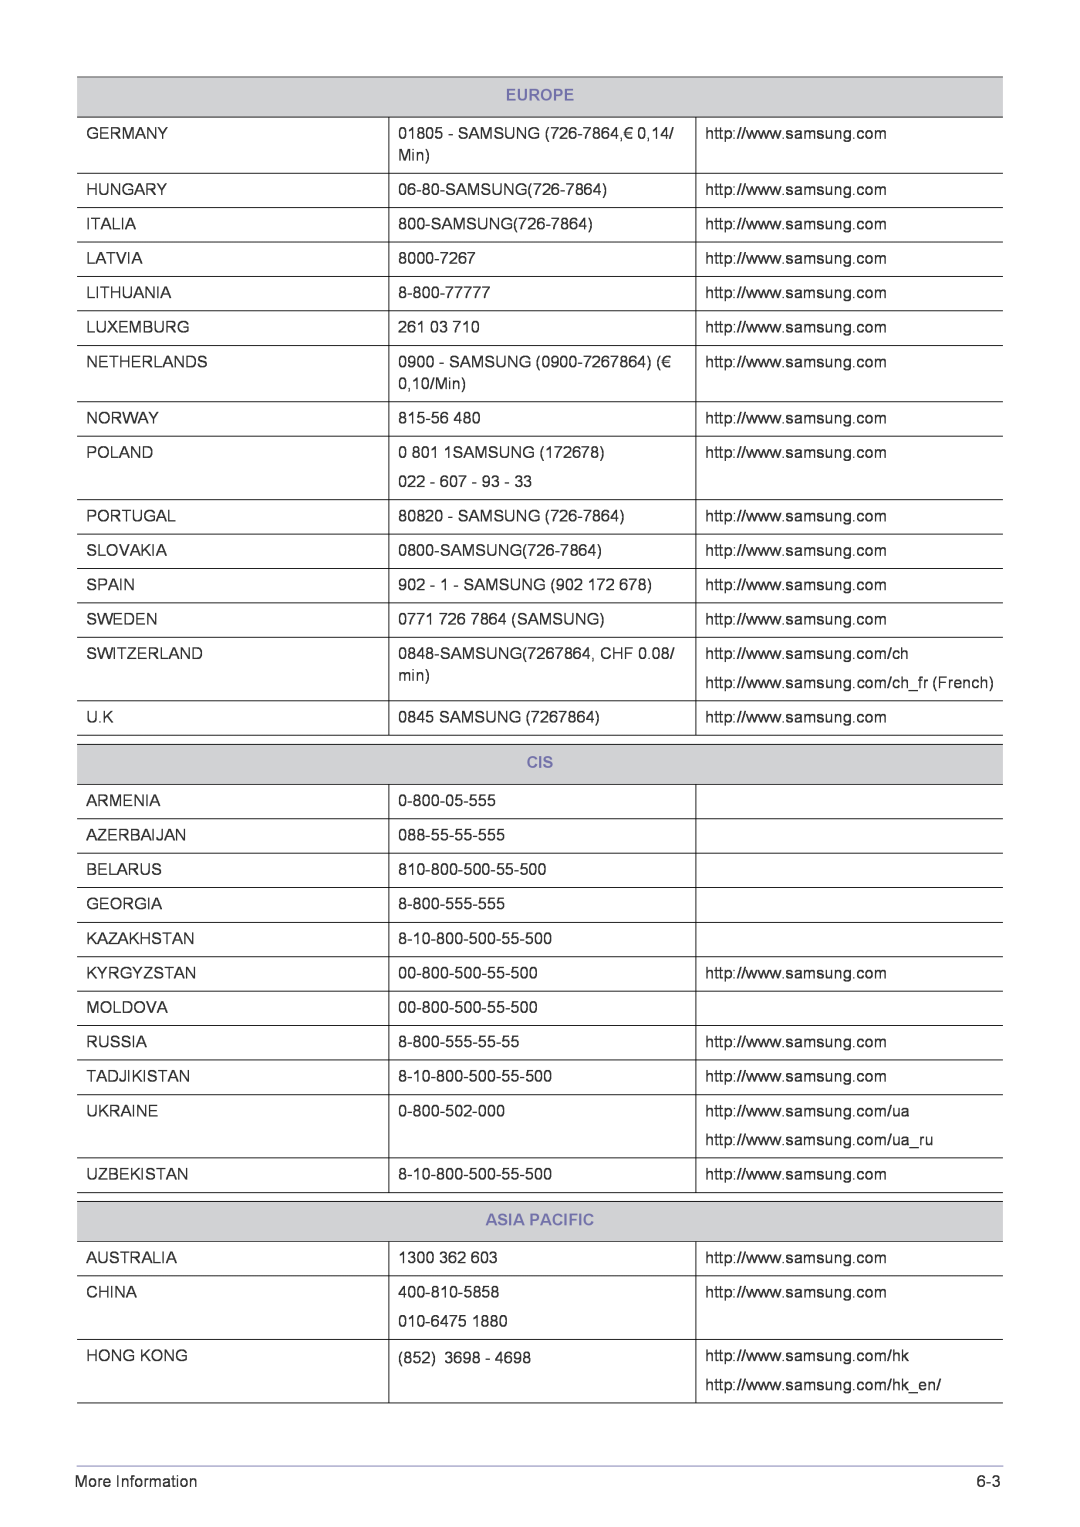 Samsung XL2270 user manual Europe, Asia Pacific 